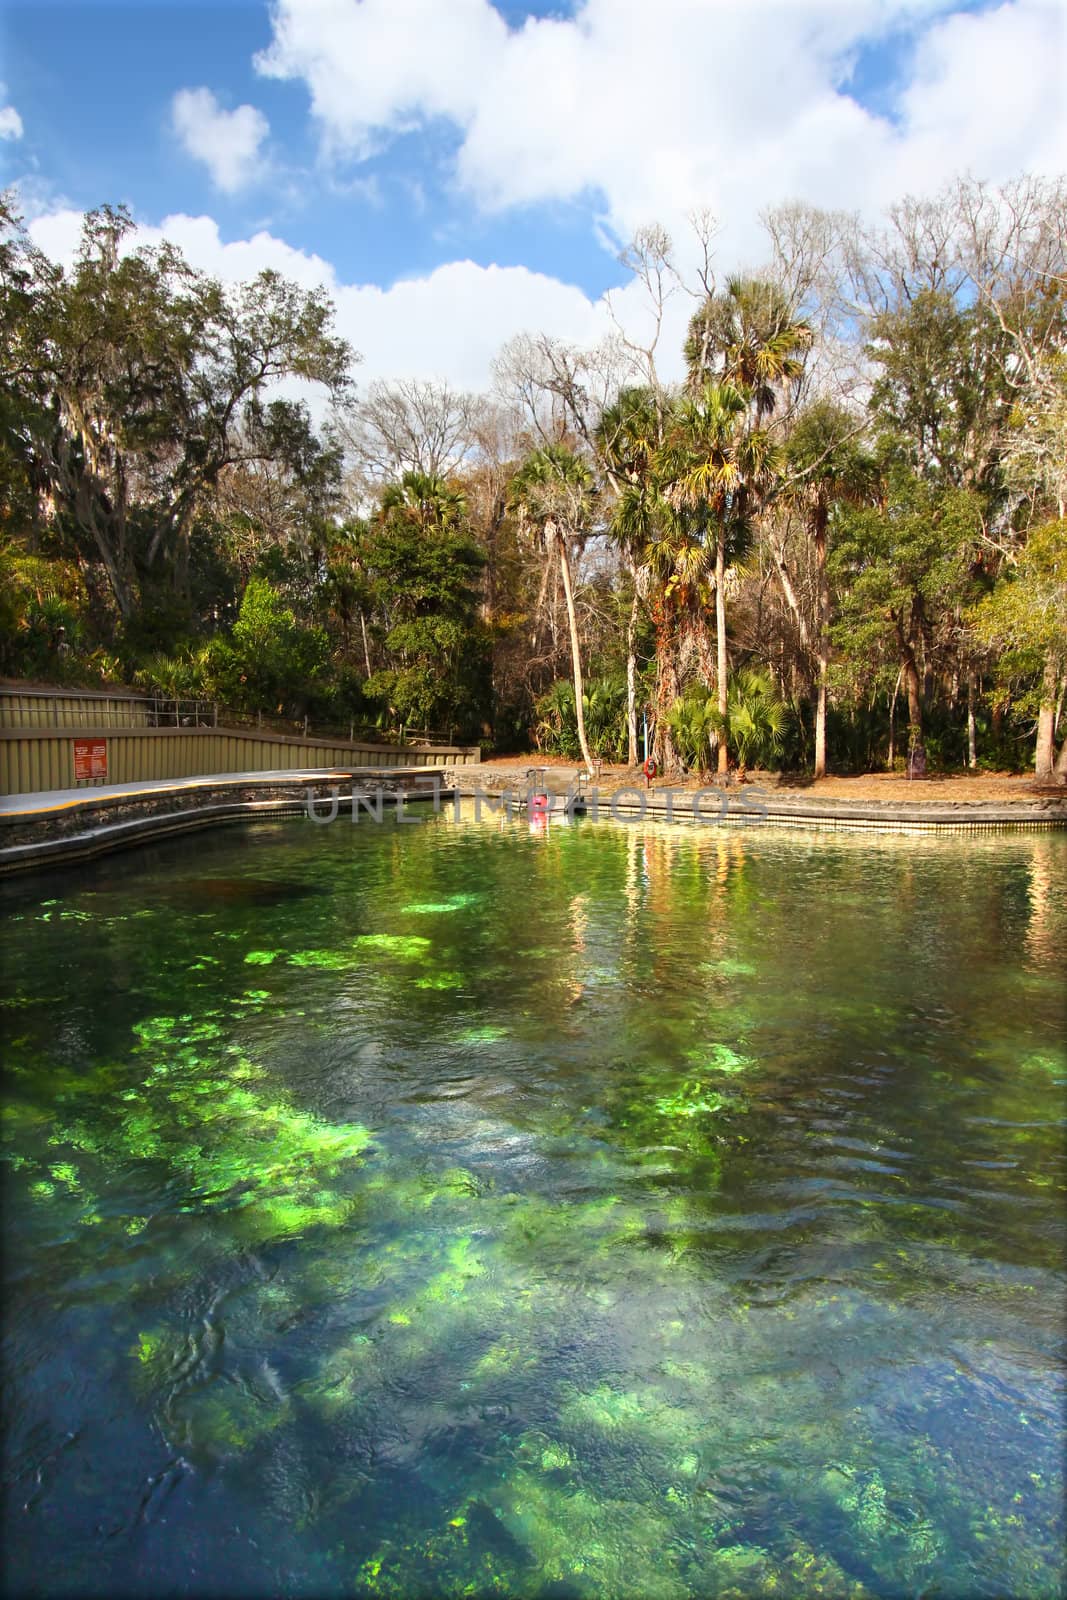 Clear waters of Wekiwa Springs State Park in central Florida.